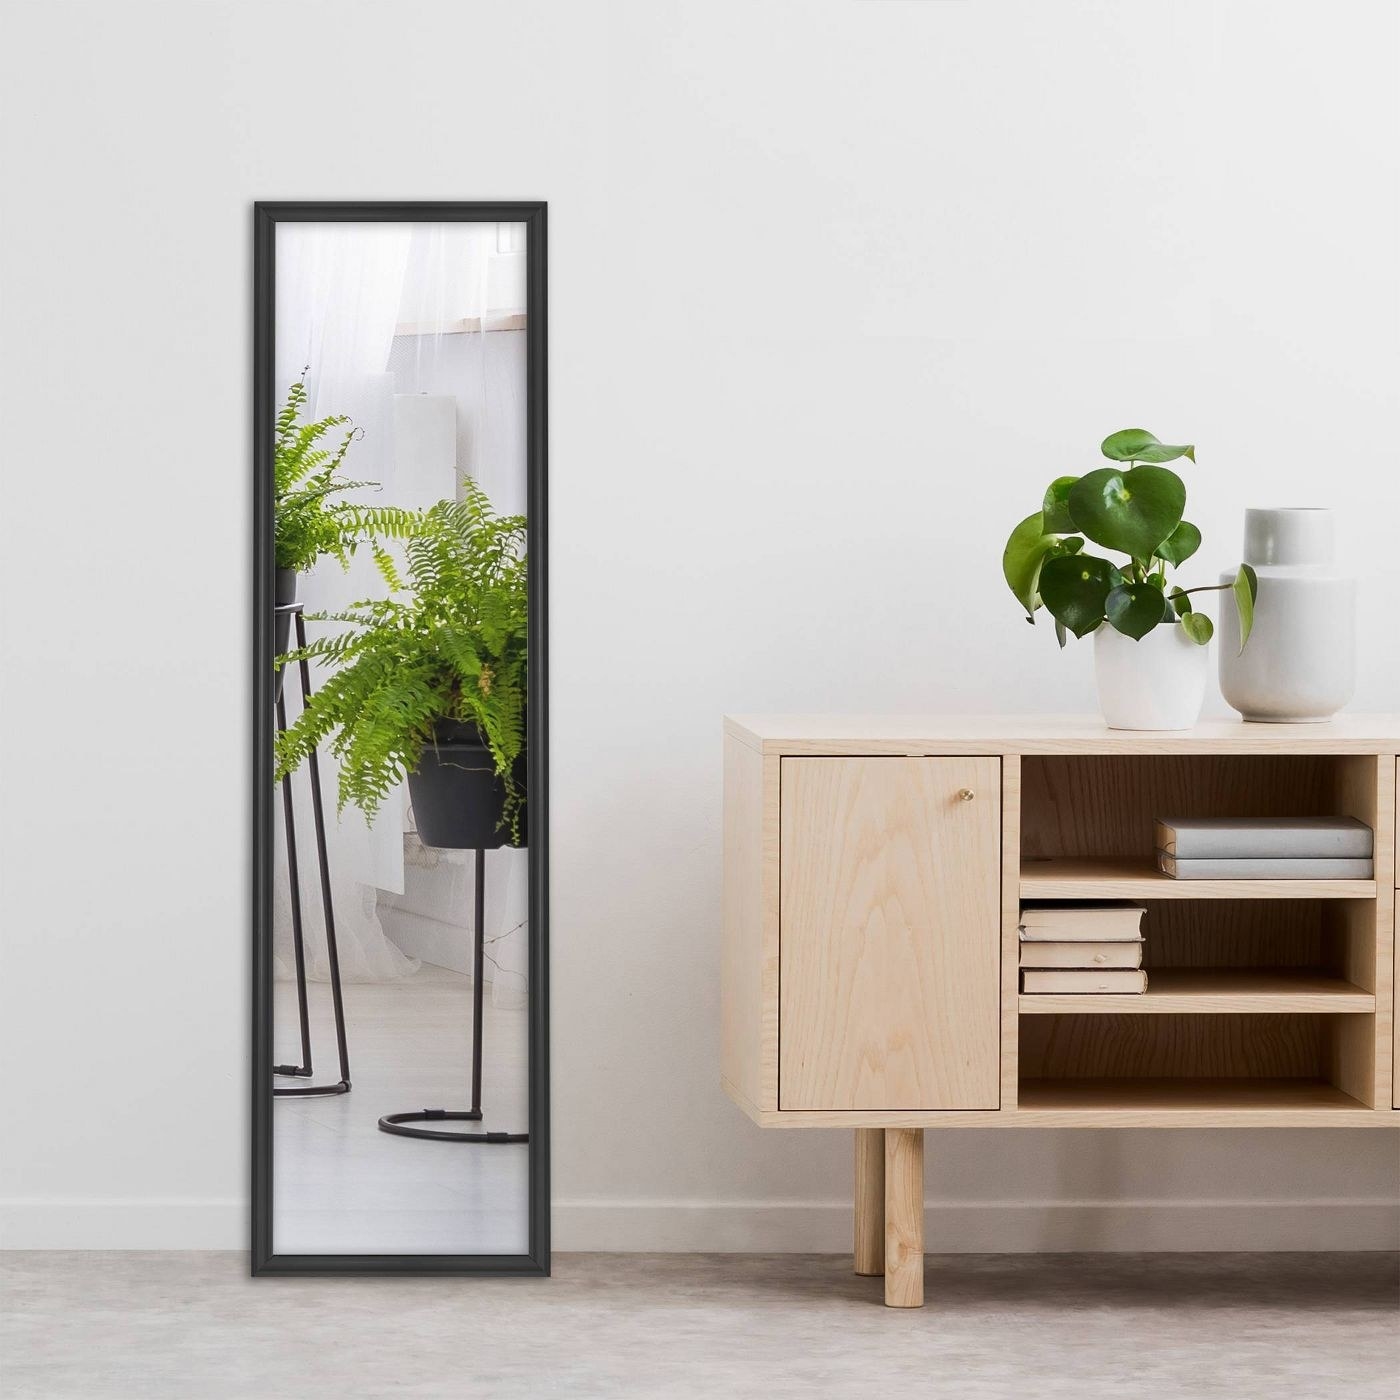 A black framed rectangular wall mirror next to a console table